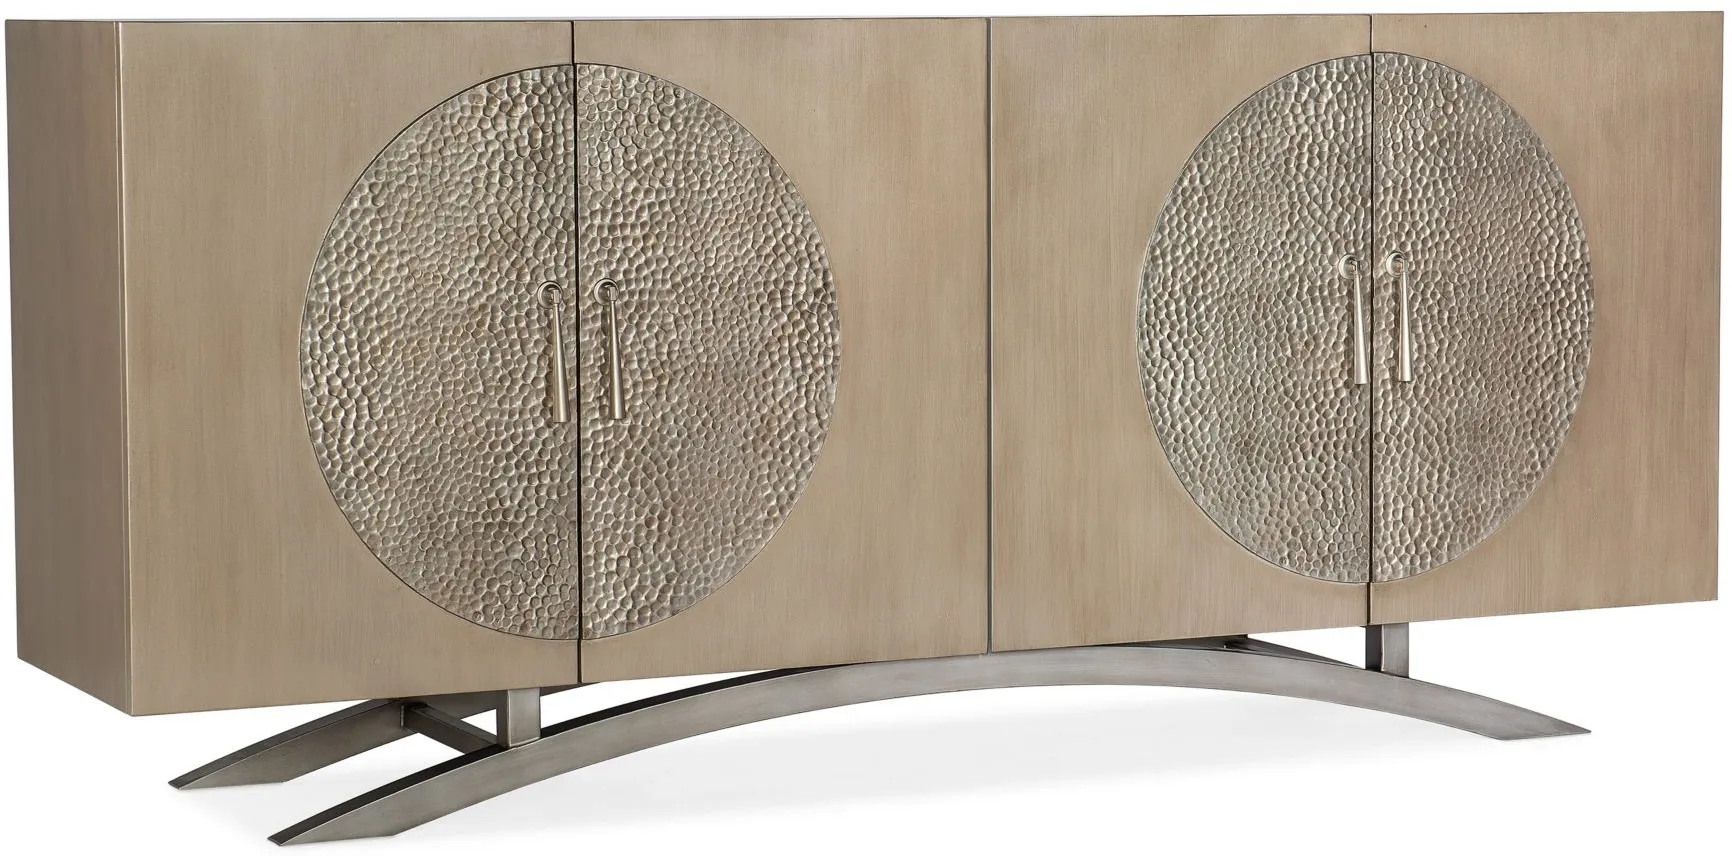 Melange 4-Door Entertainment Console in Champagne finish with pewter metal teardrop pulls and base by Hooker Furniture